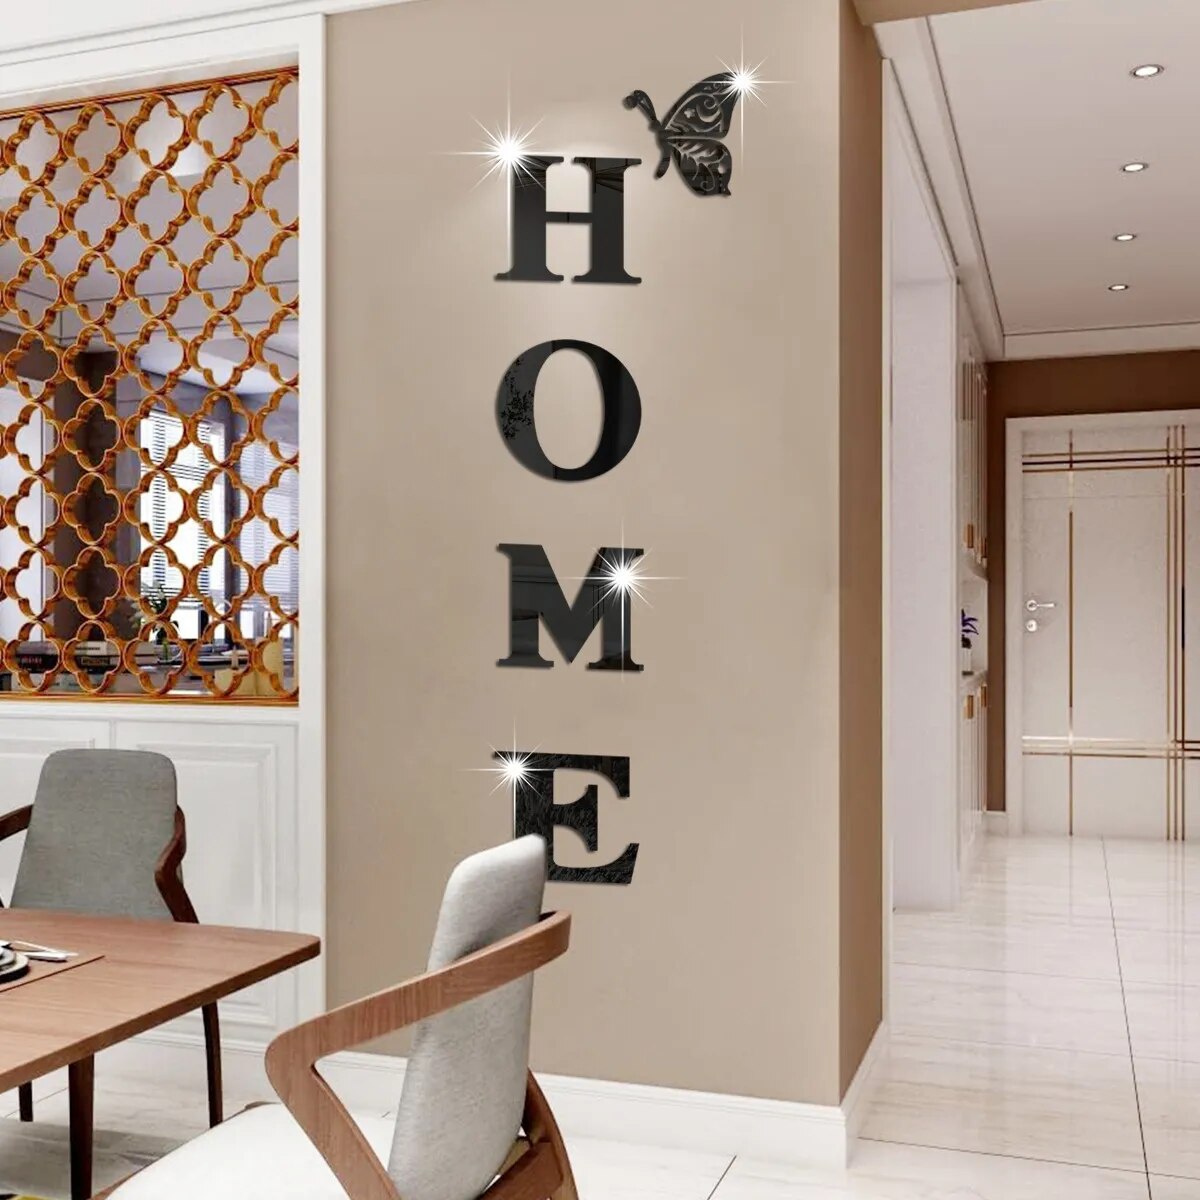 Large Mirrored HOME Letters Self Adhesive Removable Wall Stickers Creative DIY Wall Decoration For Living Room Kitchen Wall Decor